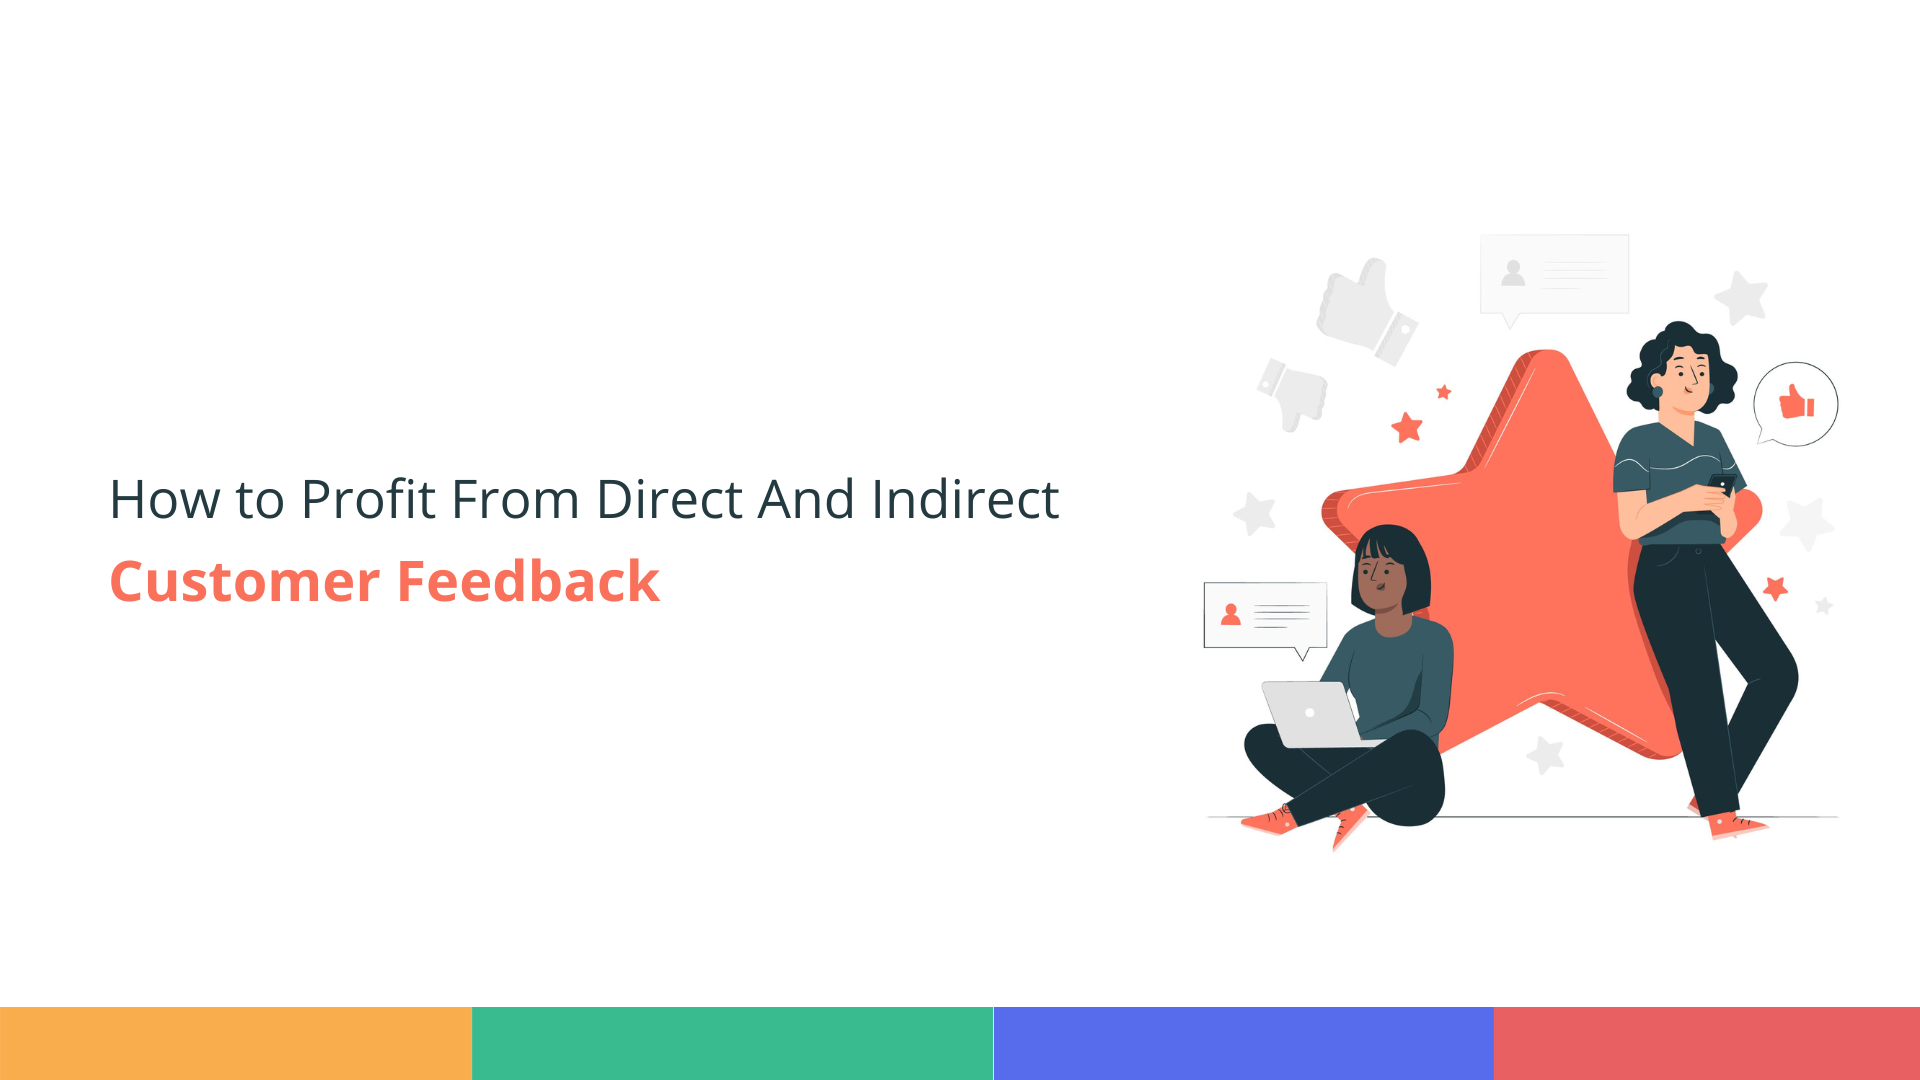 How to Profit From Direct And Indirect Customer Feedback